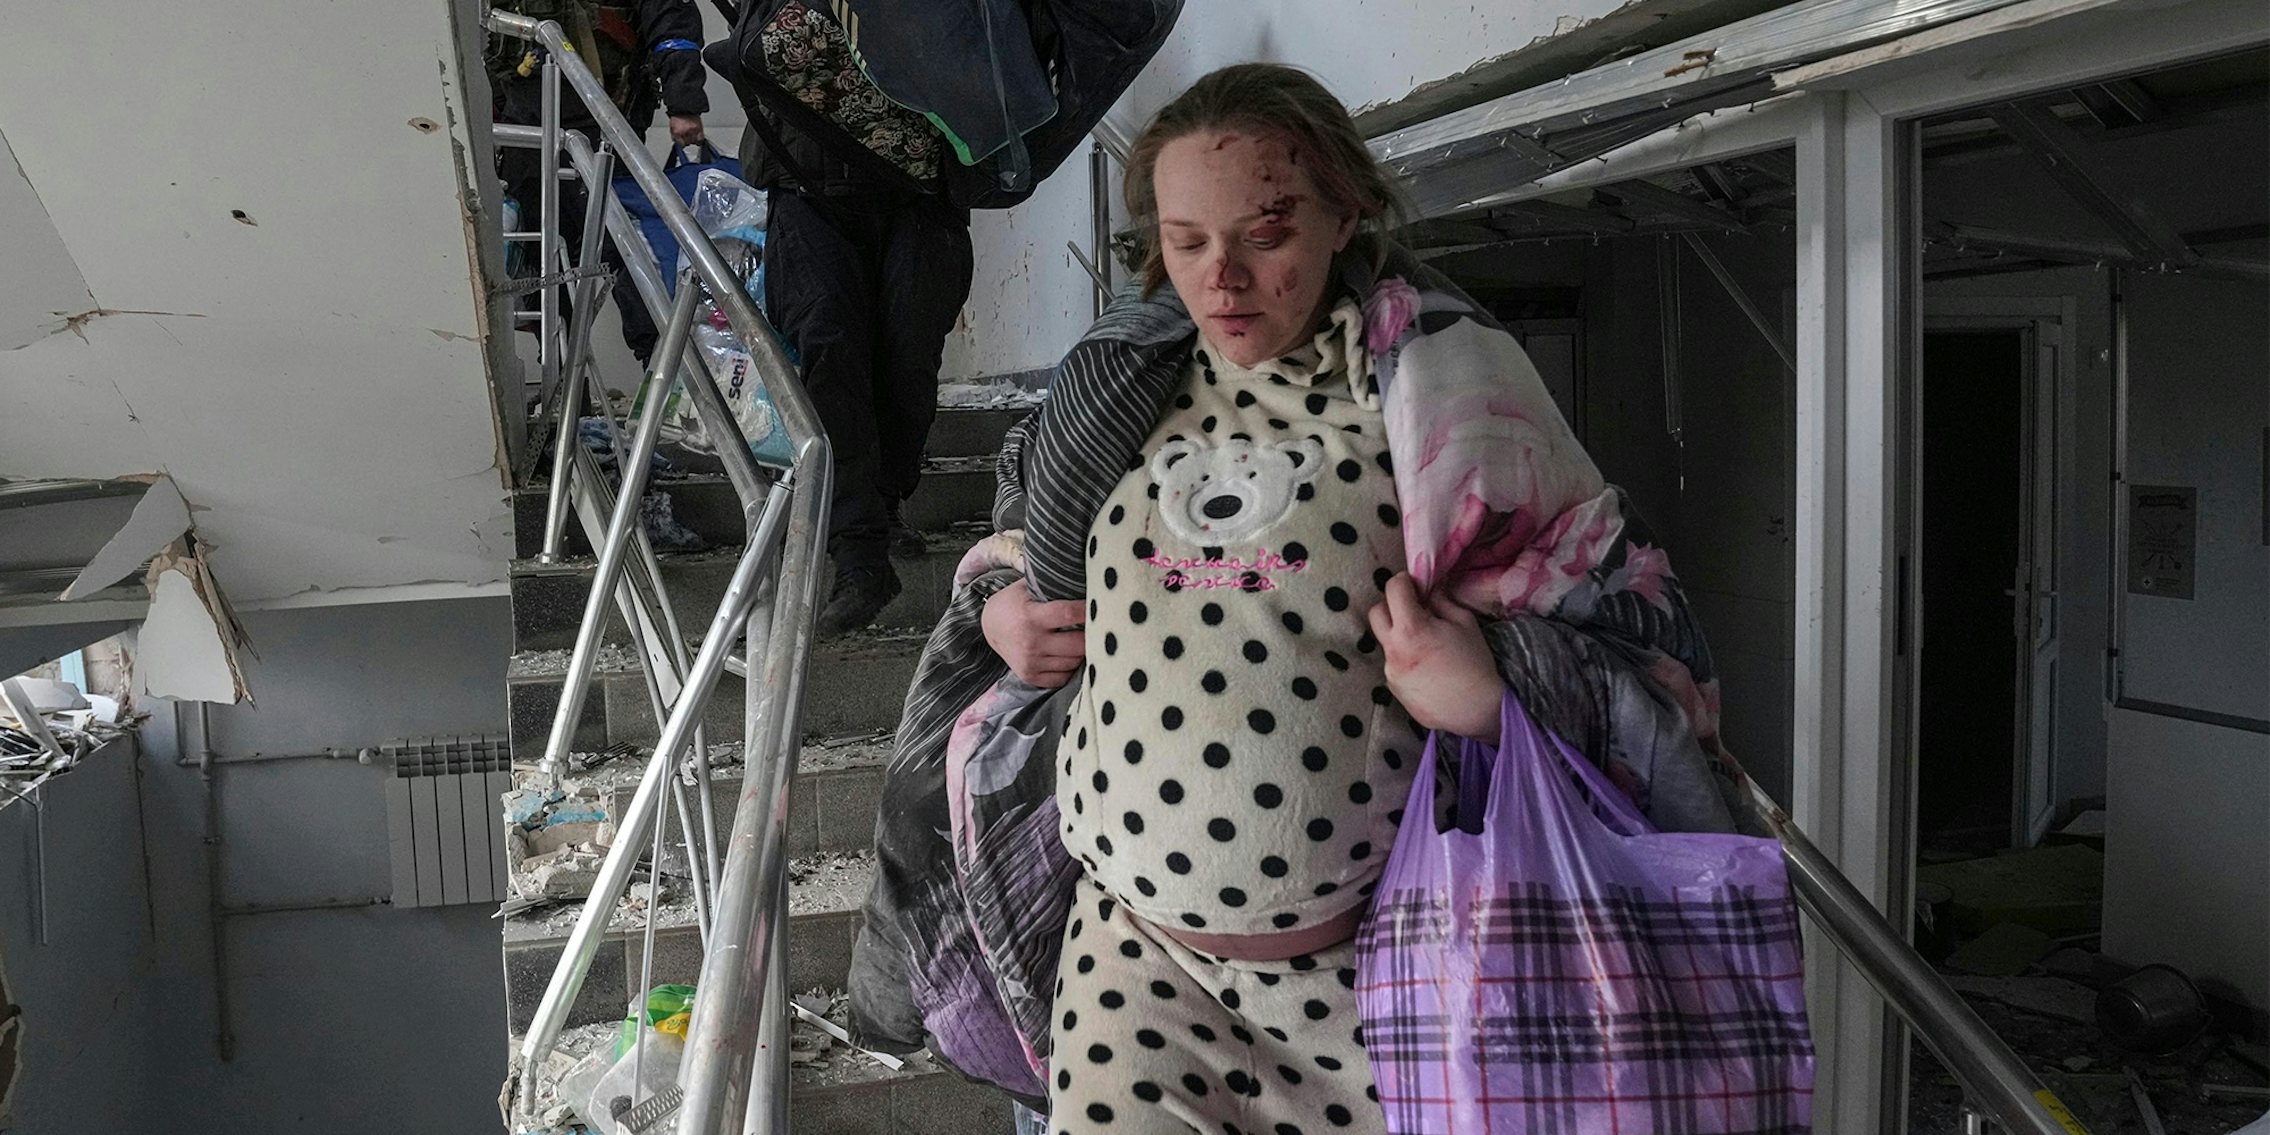 wounded pregnant woman leaving ruined building